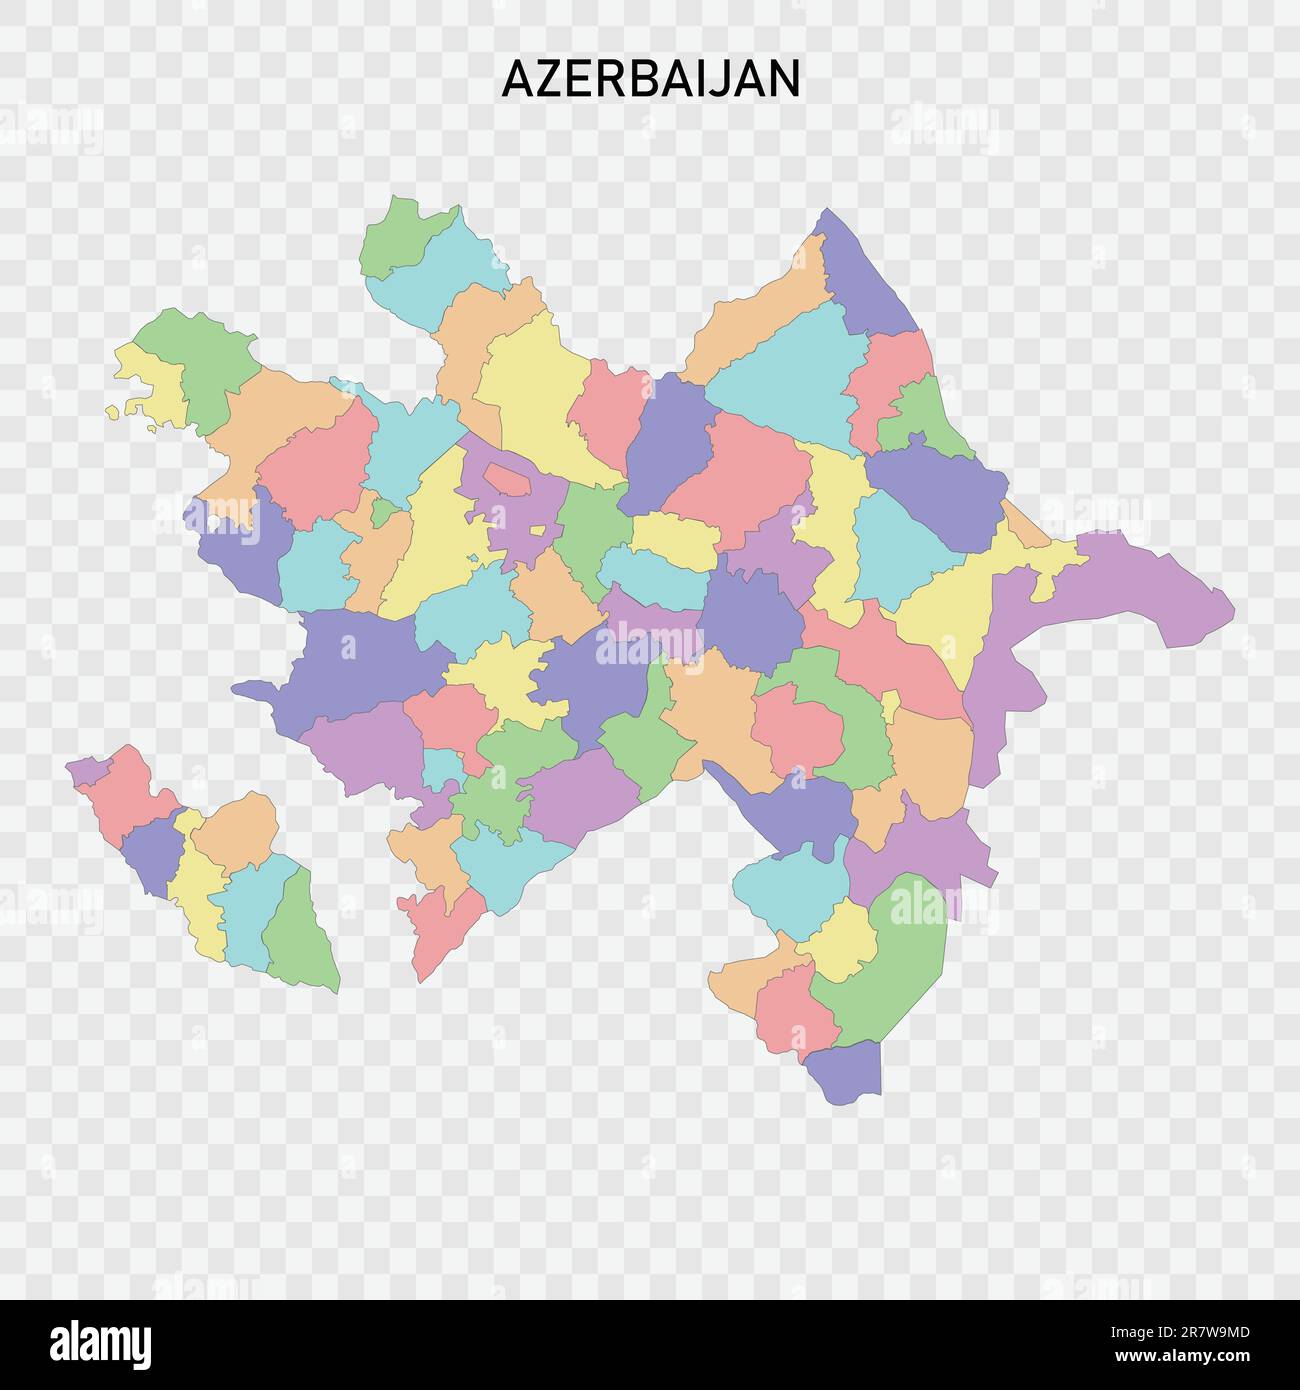 Isolated colored map of Azerbaijan with borders of the regions Stock Vector